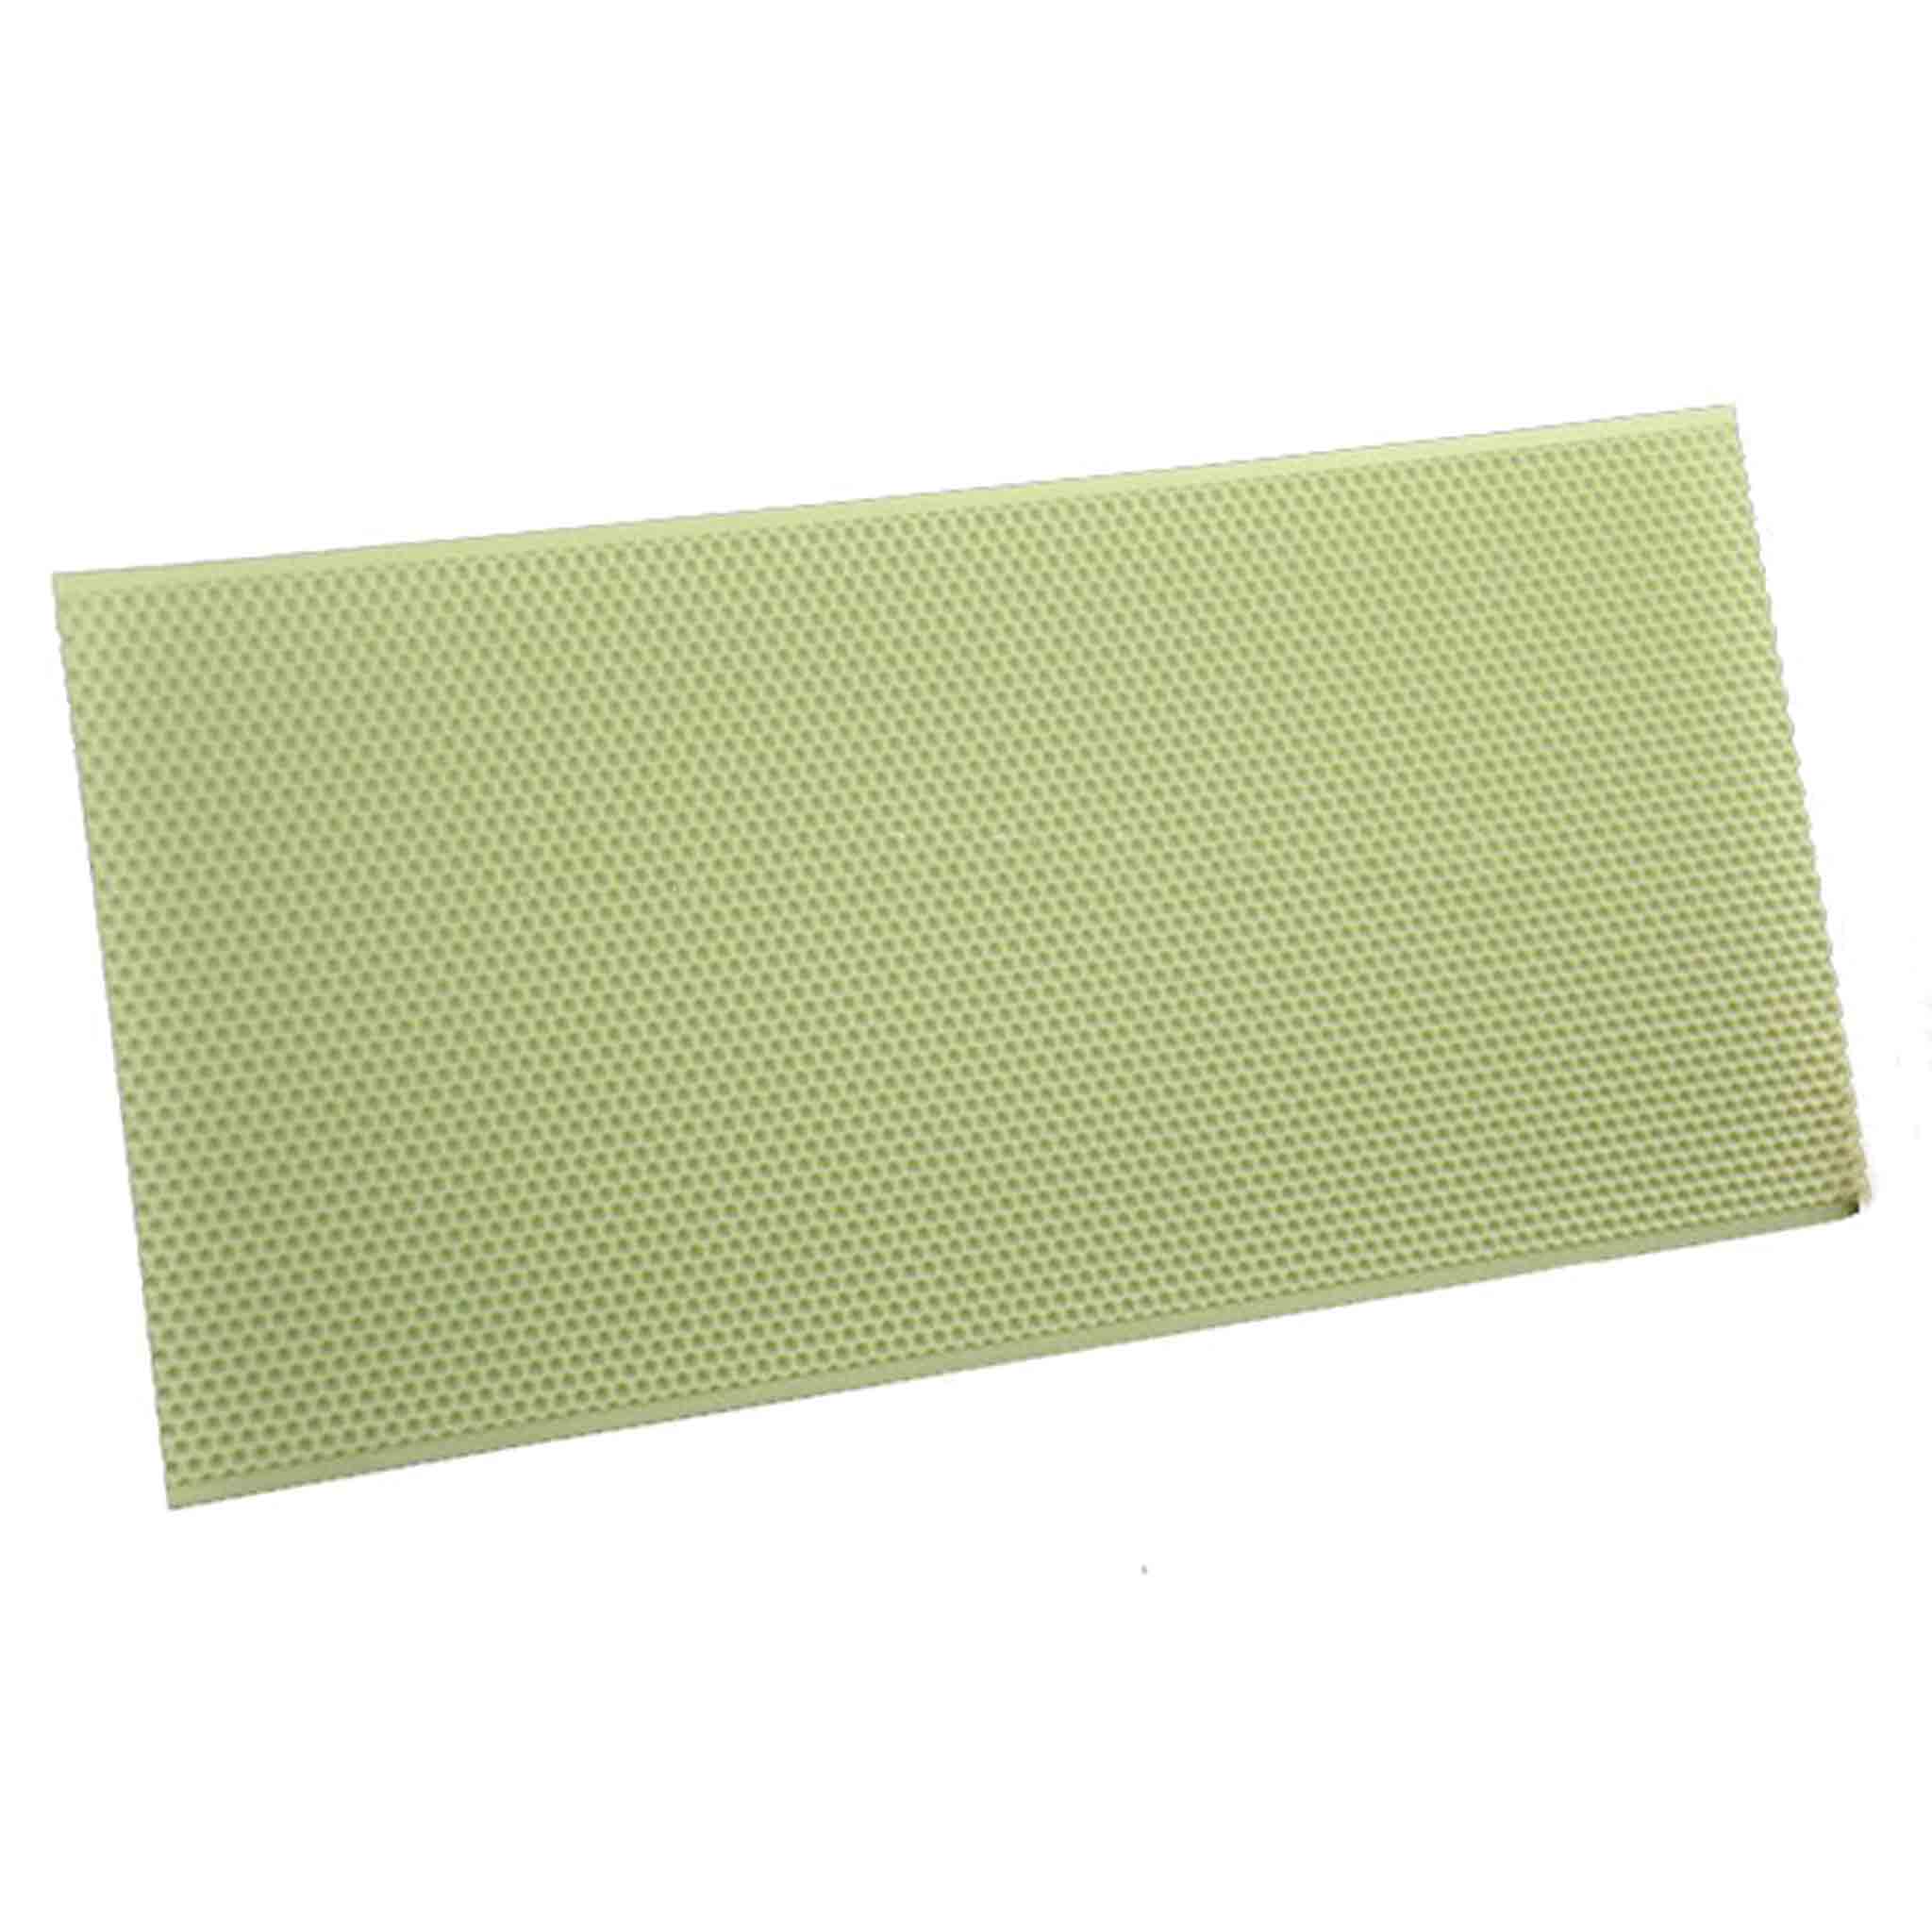 Foundation for langstroth Deep - Plastic - Light Green - Hive Parts collection by Buzzbee Beekeeping Supplies